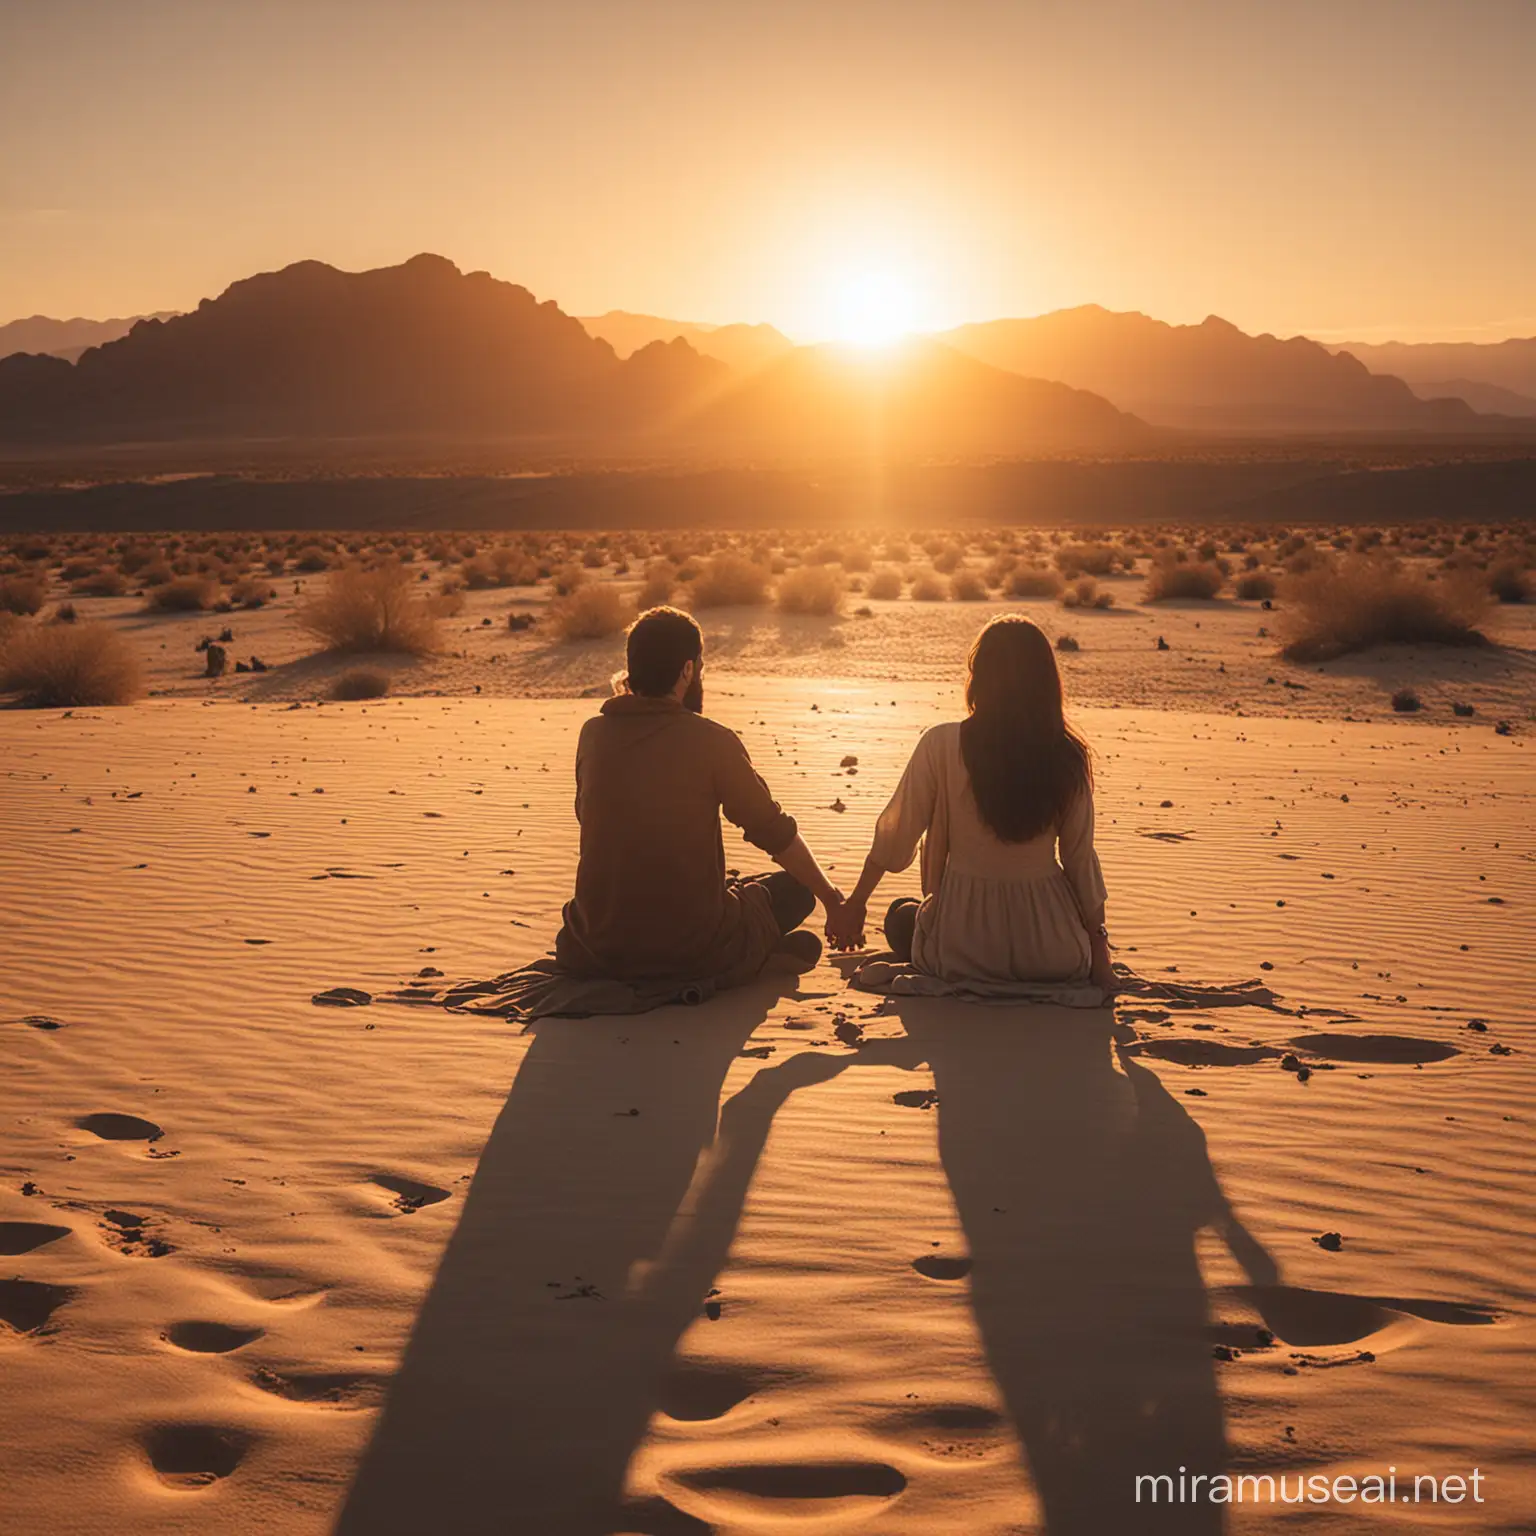 one man and one woman seated in a desert holding hands
and watching the sun rise